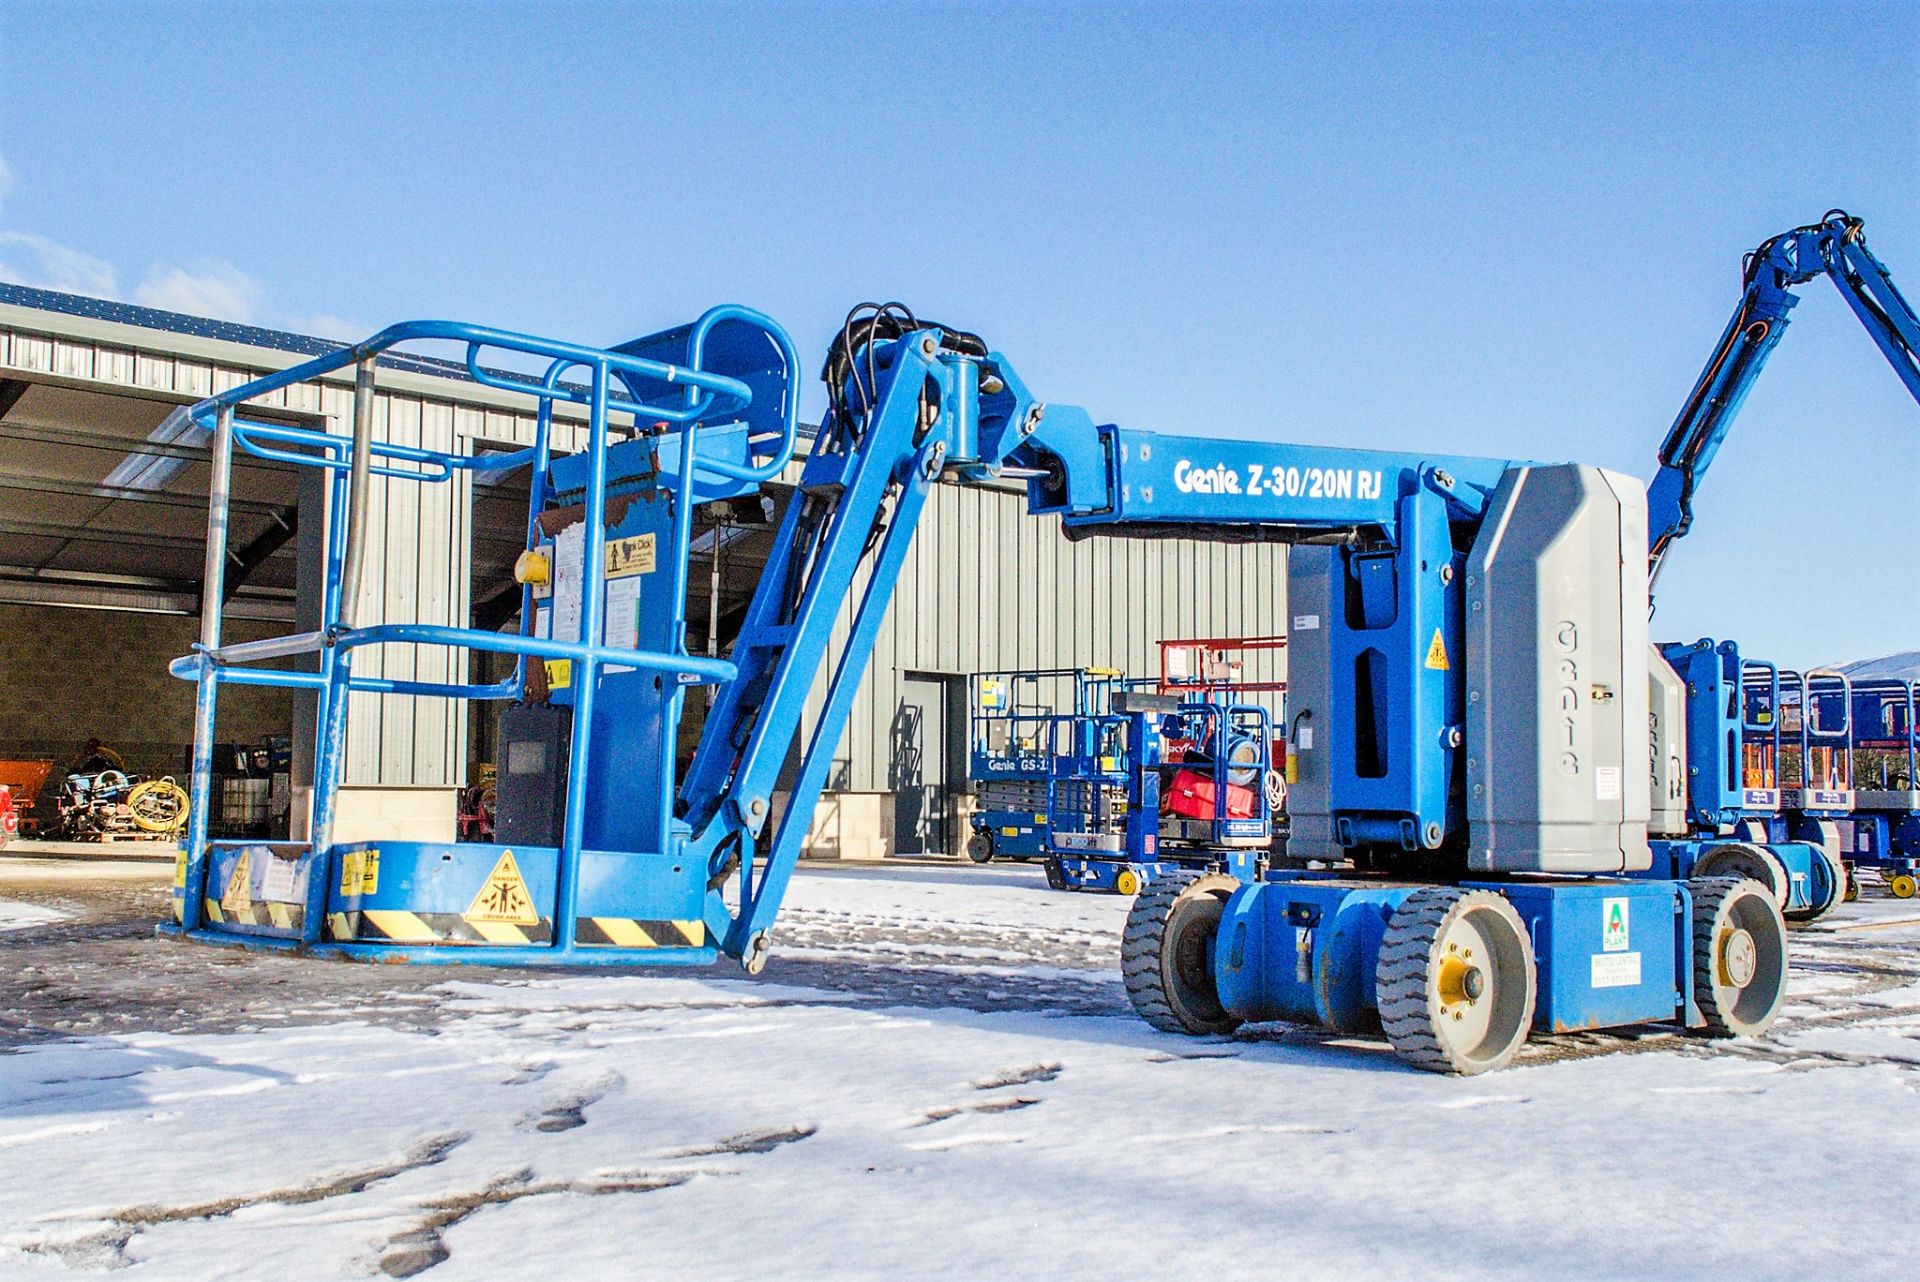 Genie Z-30/20 battery electric boom lift access platform Year: 2014 S/N: 15129 Recorded Hours: 208